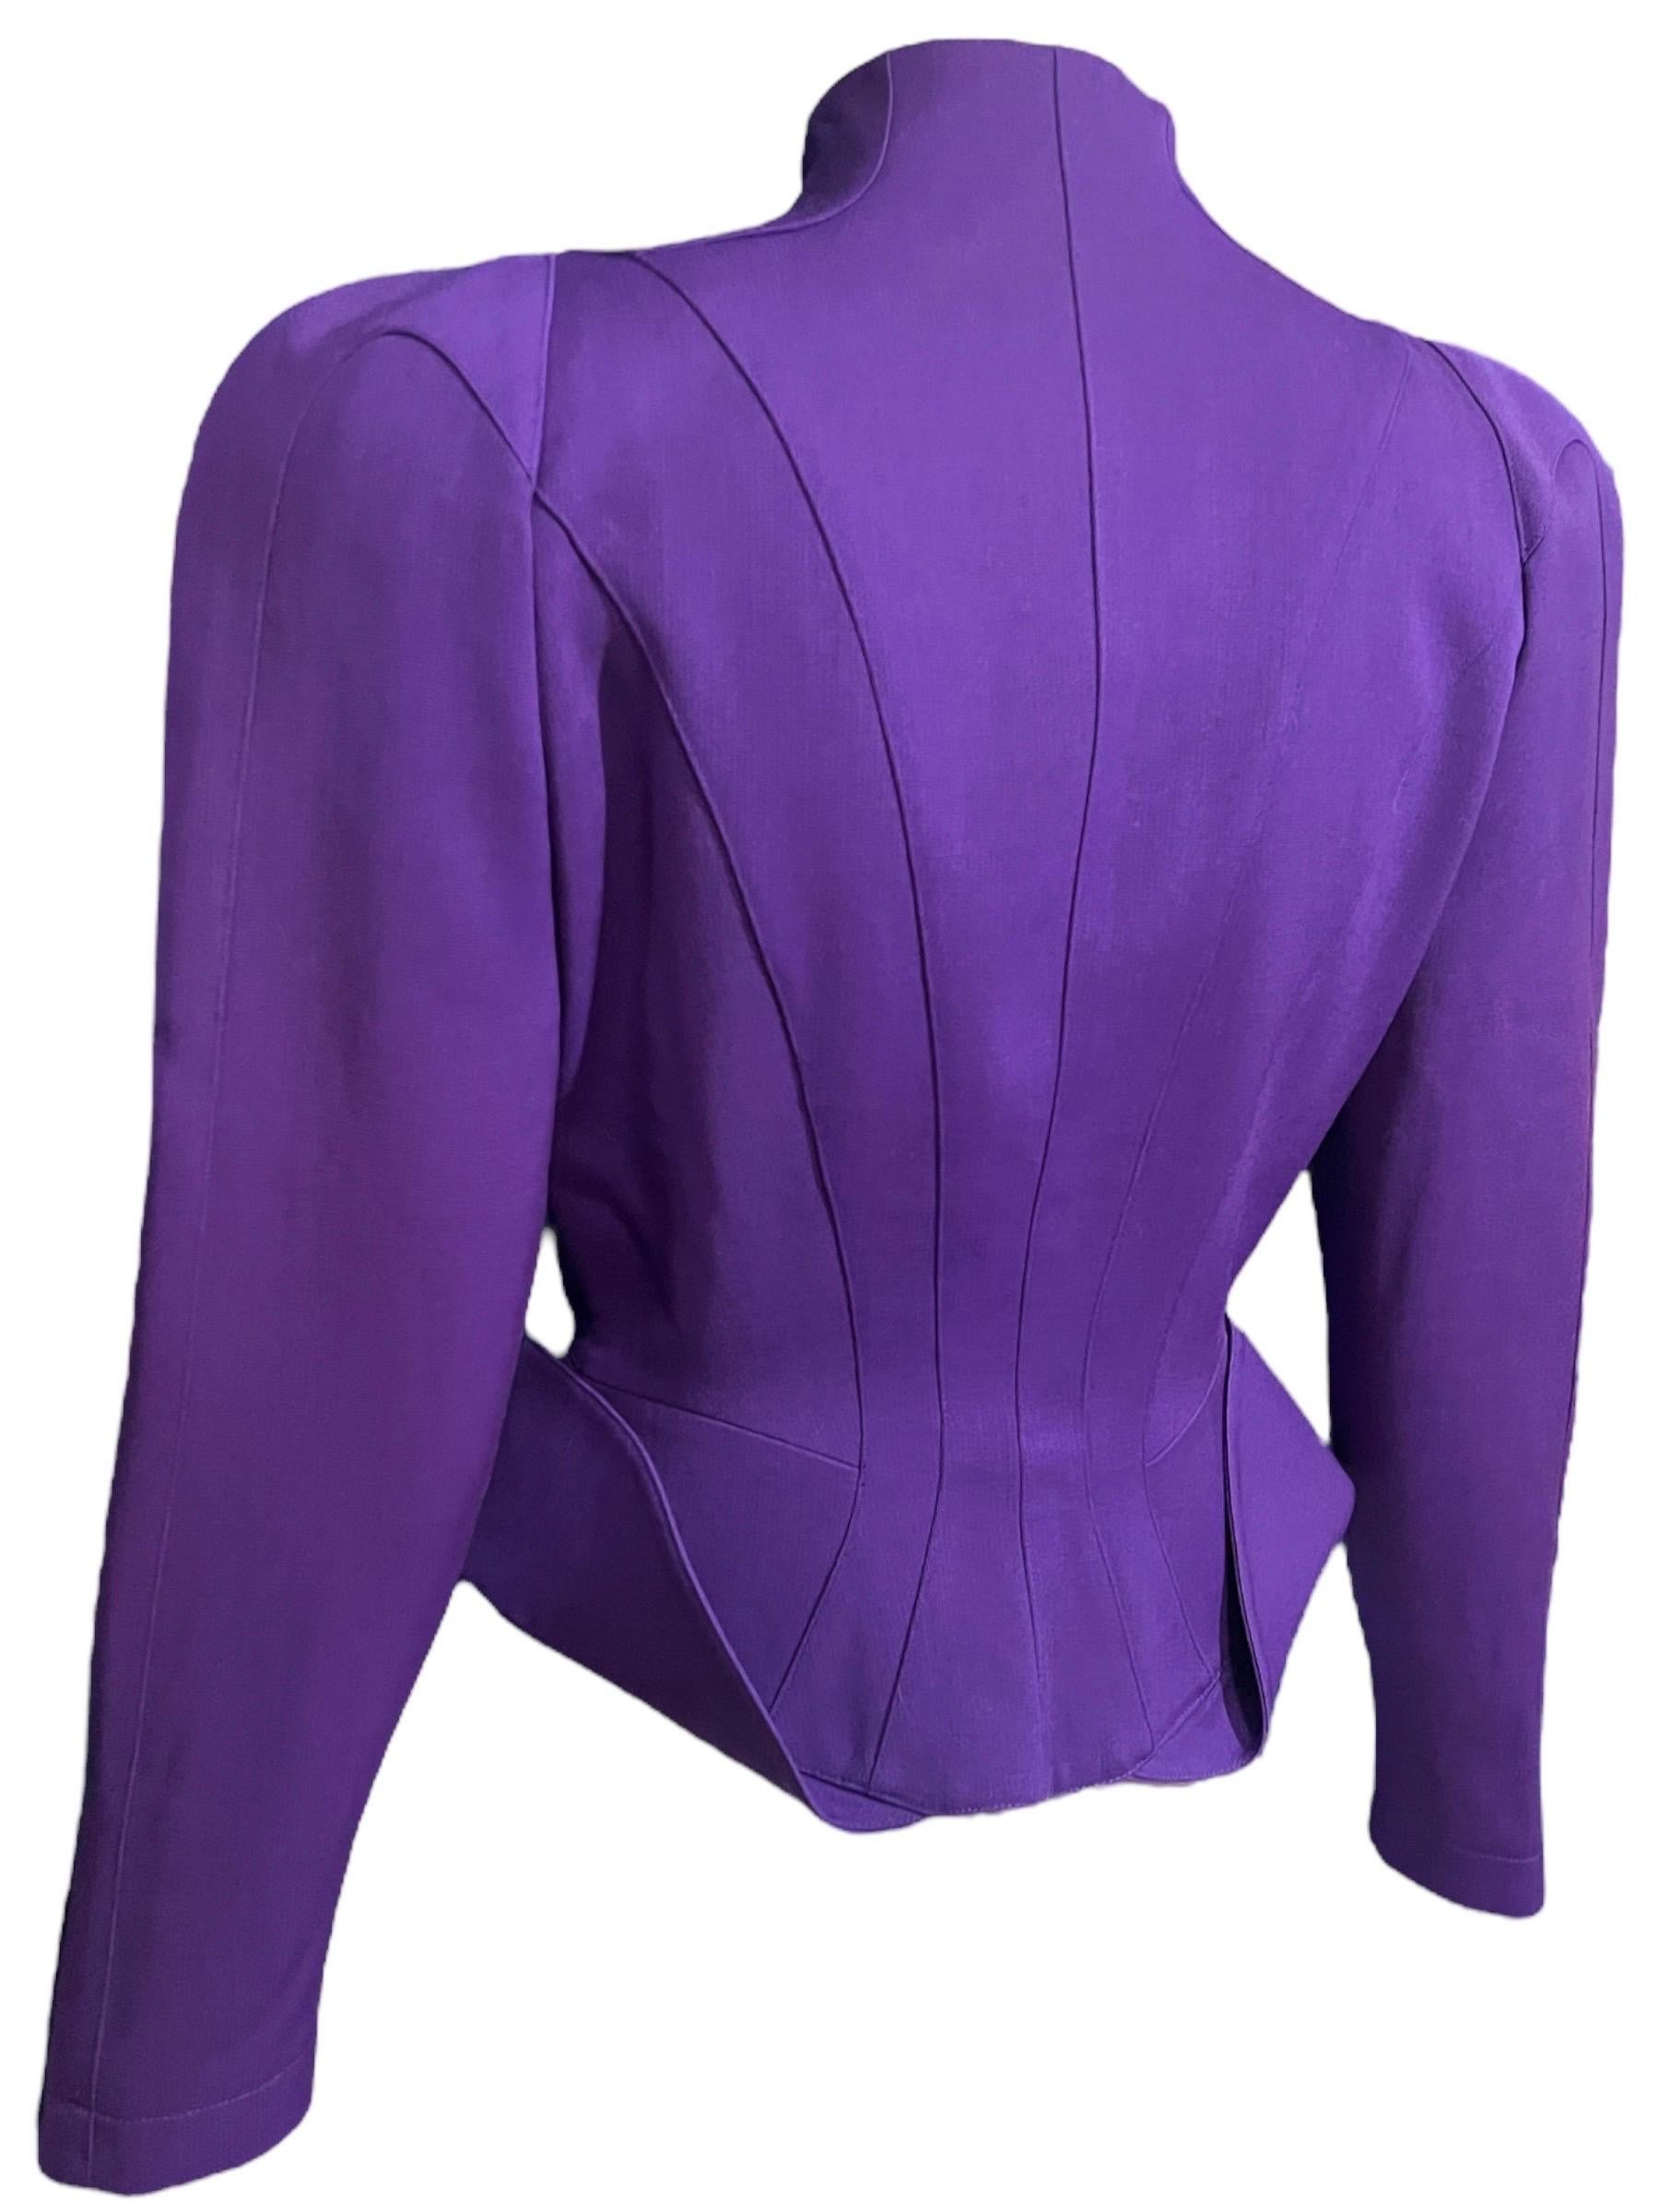 F/W 1988 Thierry Mugler Purple Futuristic Les Infernales Sculptural Jacket For Sale 5